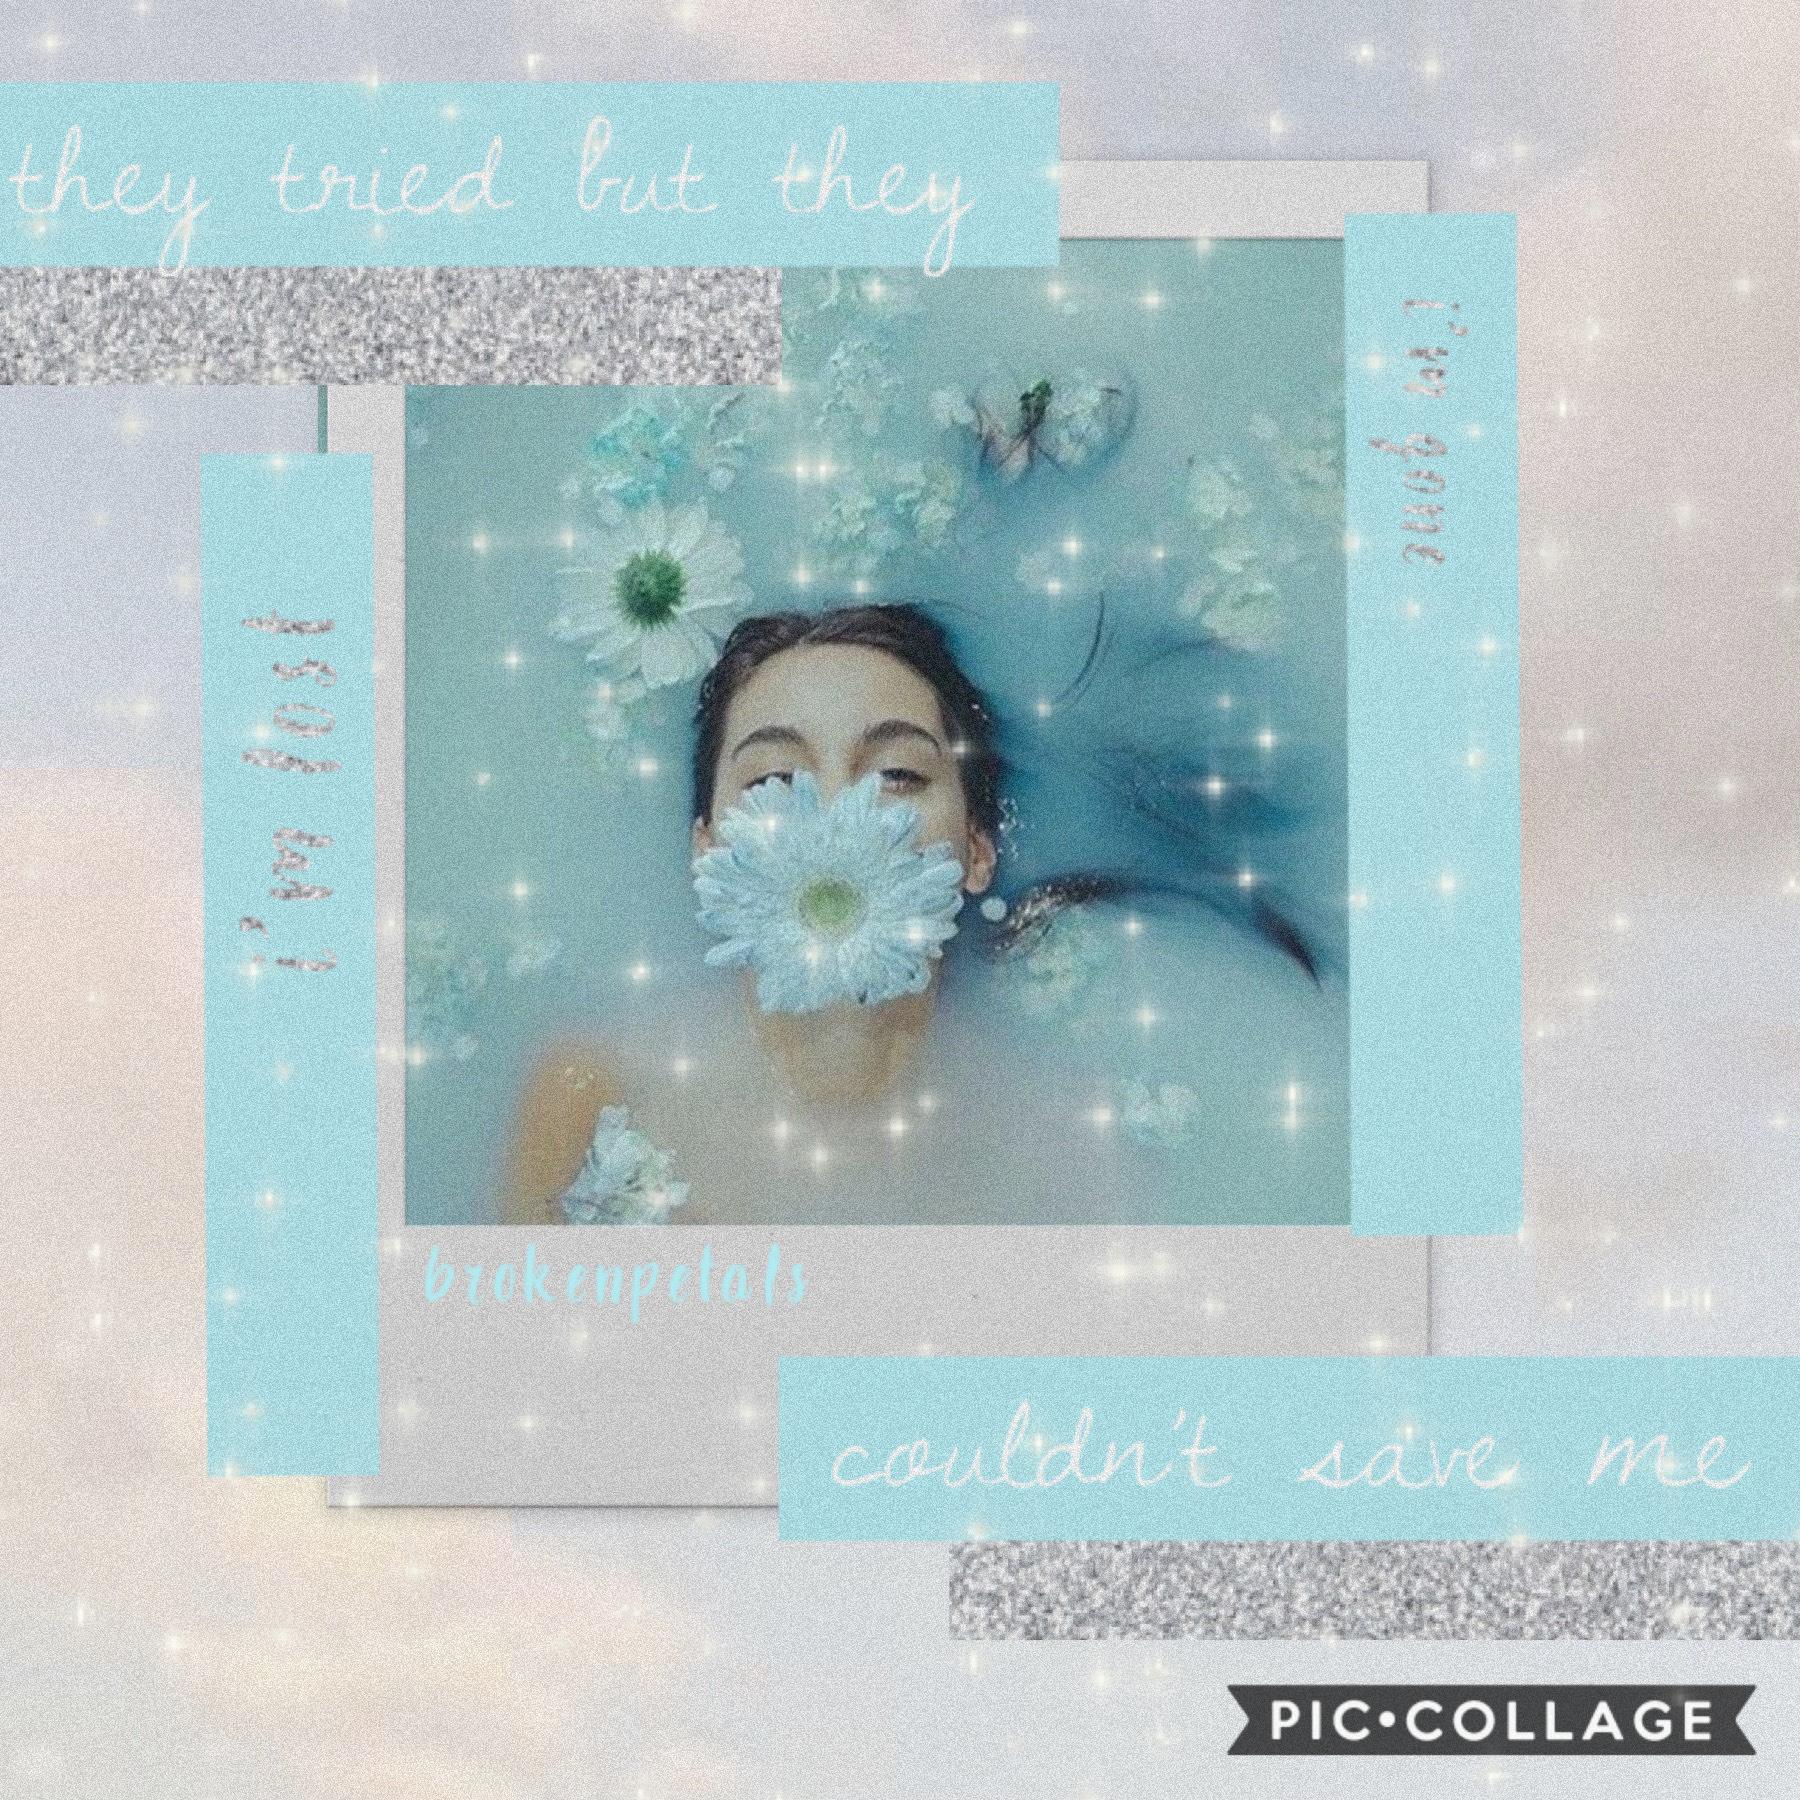 tap
hey everyone! i tried another style lol. i’m literally just trying so many new things. i’m not sure if i like how this turned out. it was an all pc edit tho!
qotd; apps you use for edits?
aotd: phonto picsart whi and superimpose